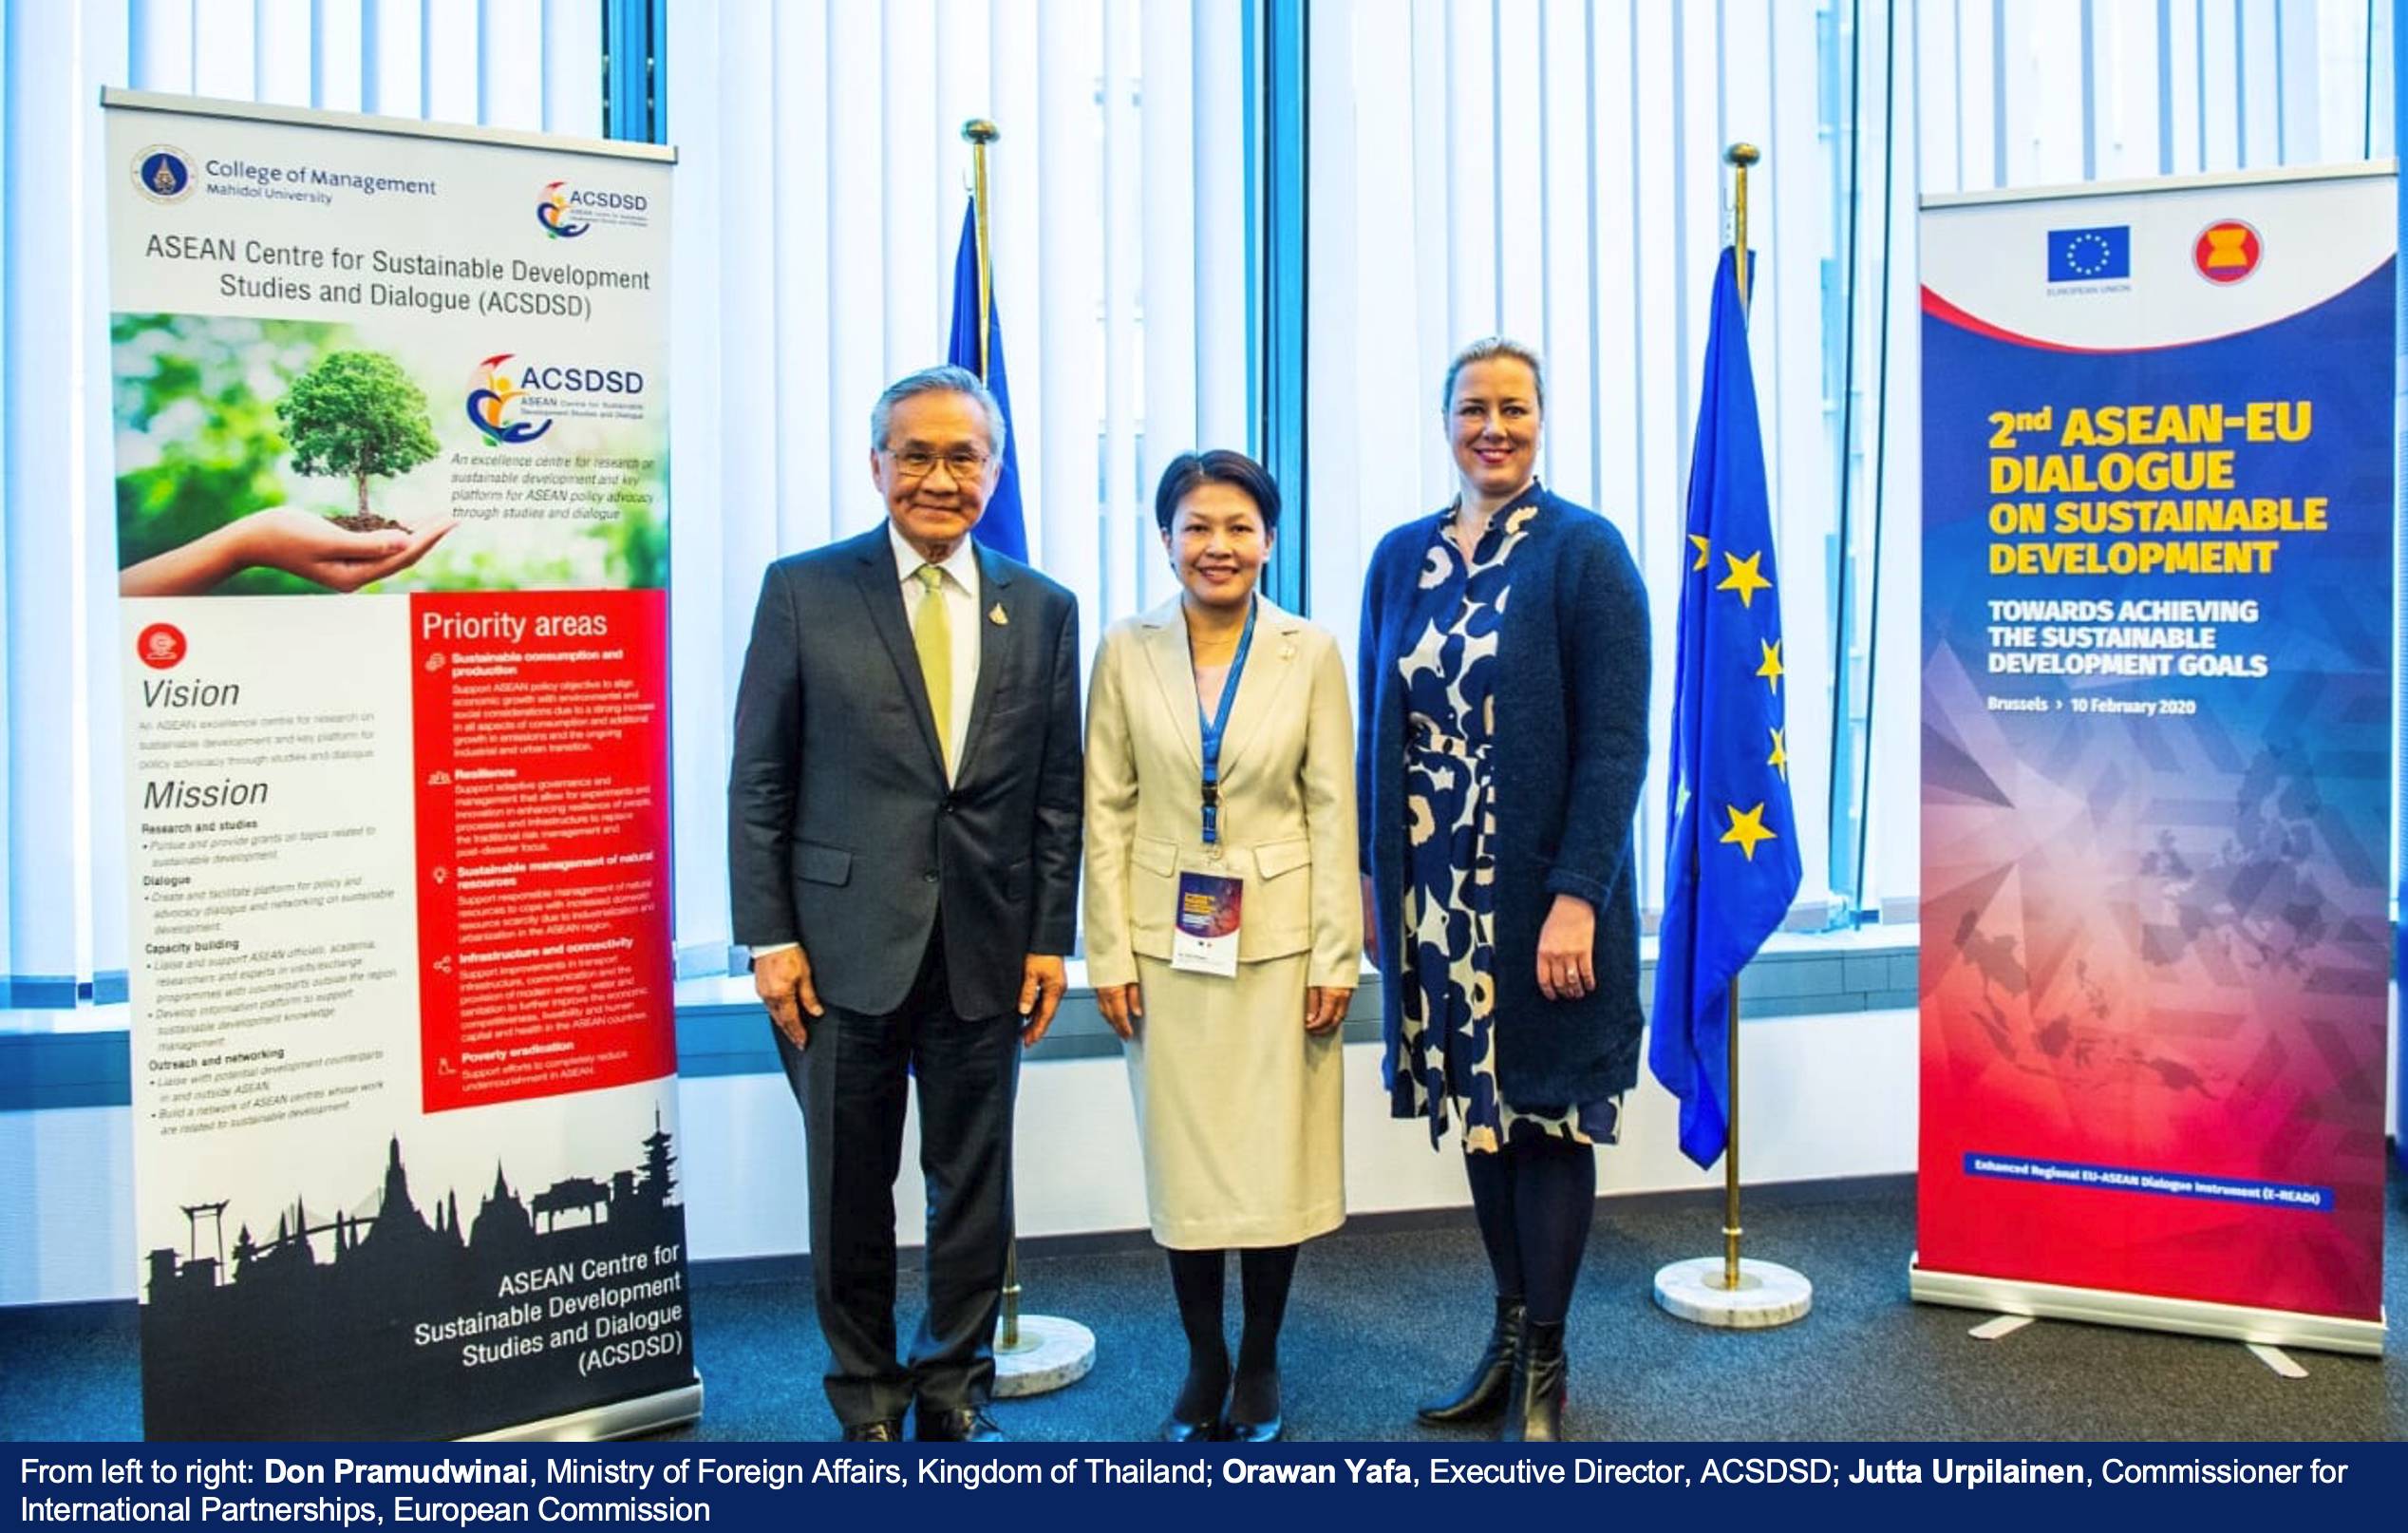 The EU and ASEAN announce joint collaboration on SCP through partnership with the ACSDSD